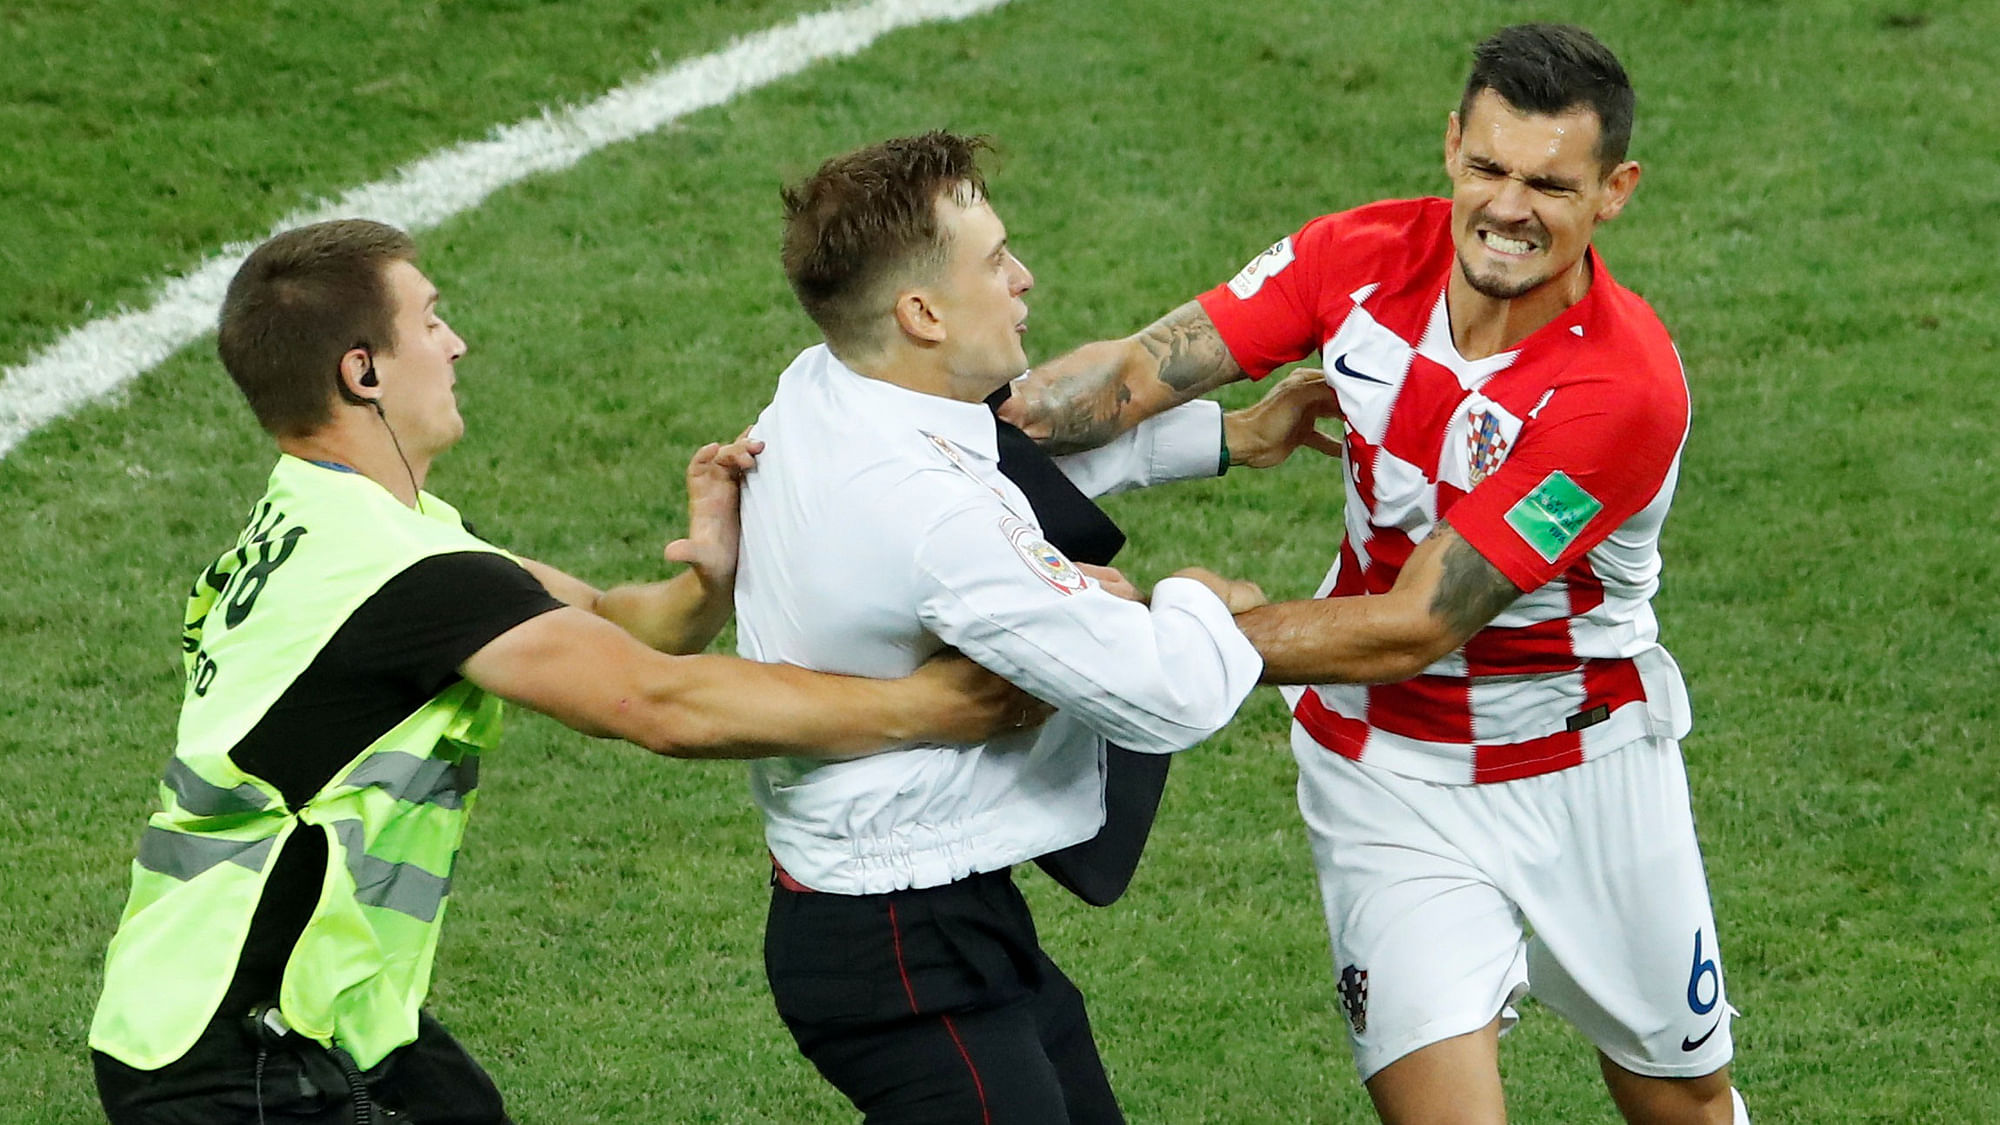 One of the members of the Pussy Riot group approaches Croatia’s Dejan Lovren during the FIFA World Cup final.